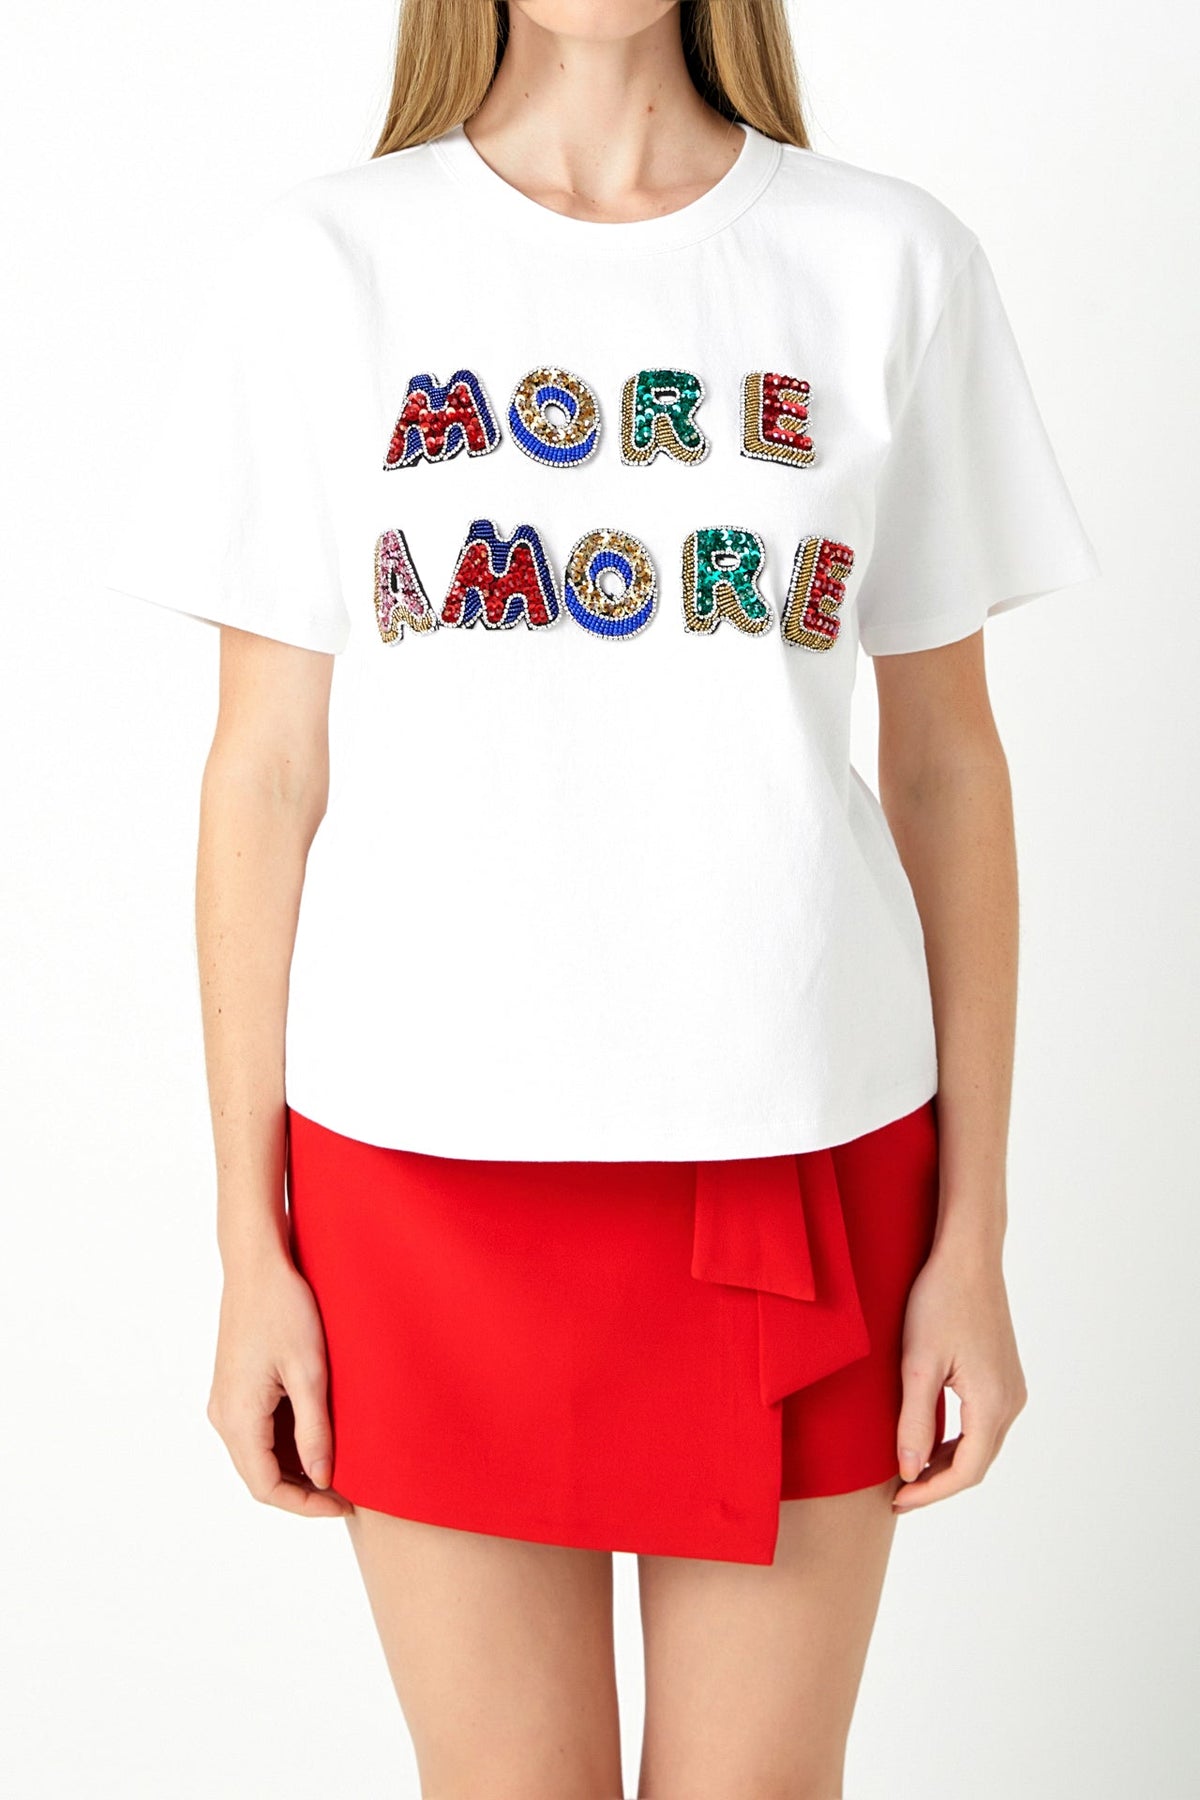 ENDLESS ROSE - More Amore Embellished Sweatshirt - T-SHIRTS available at Objectrare